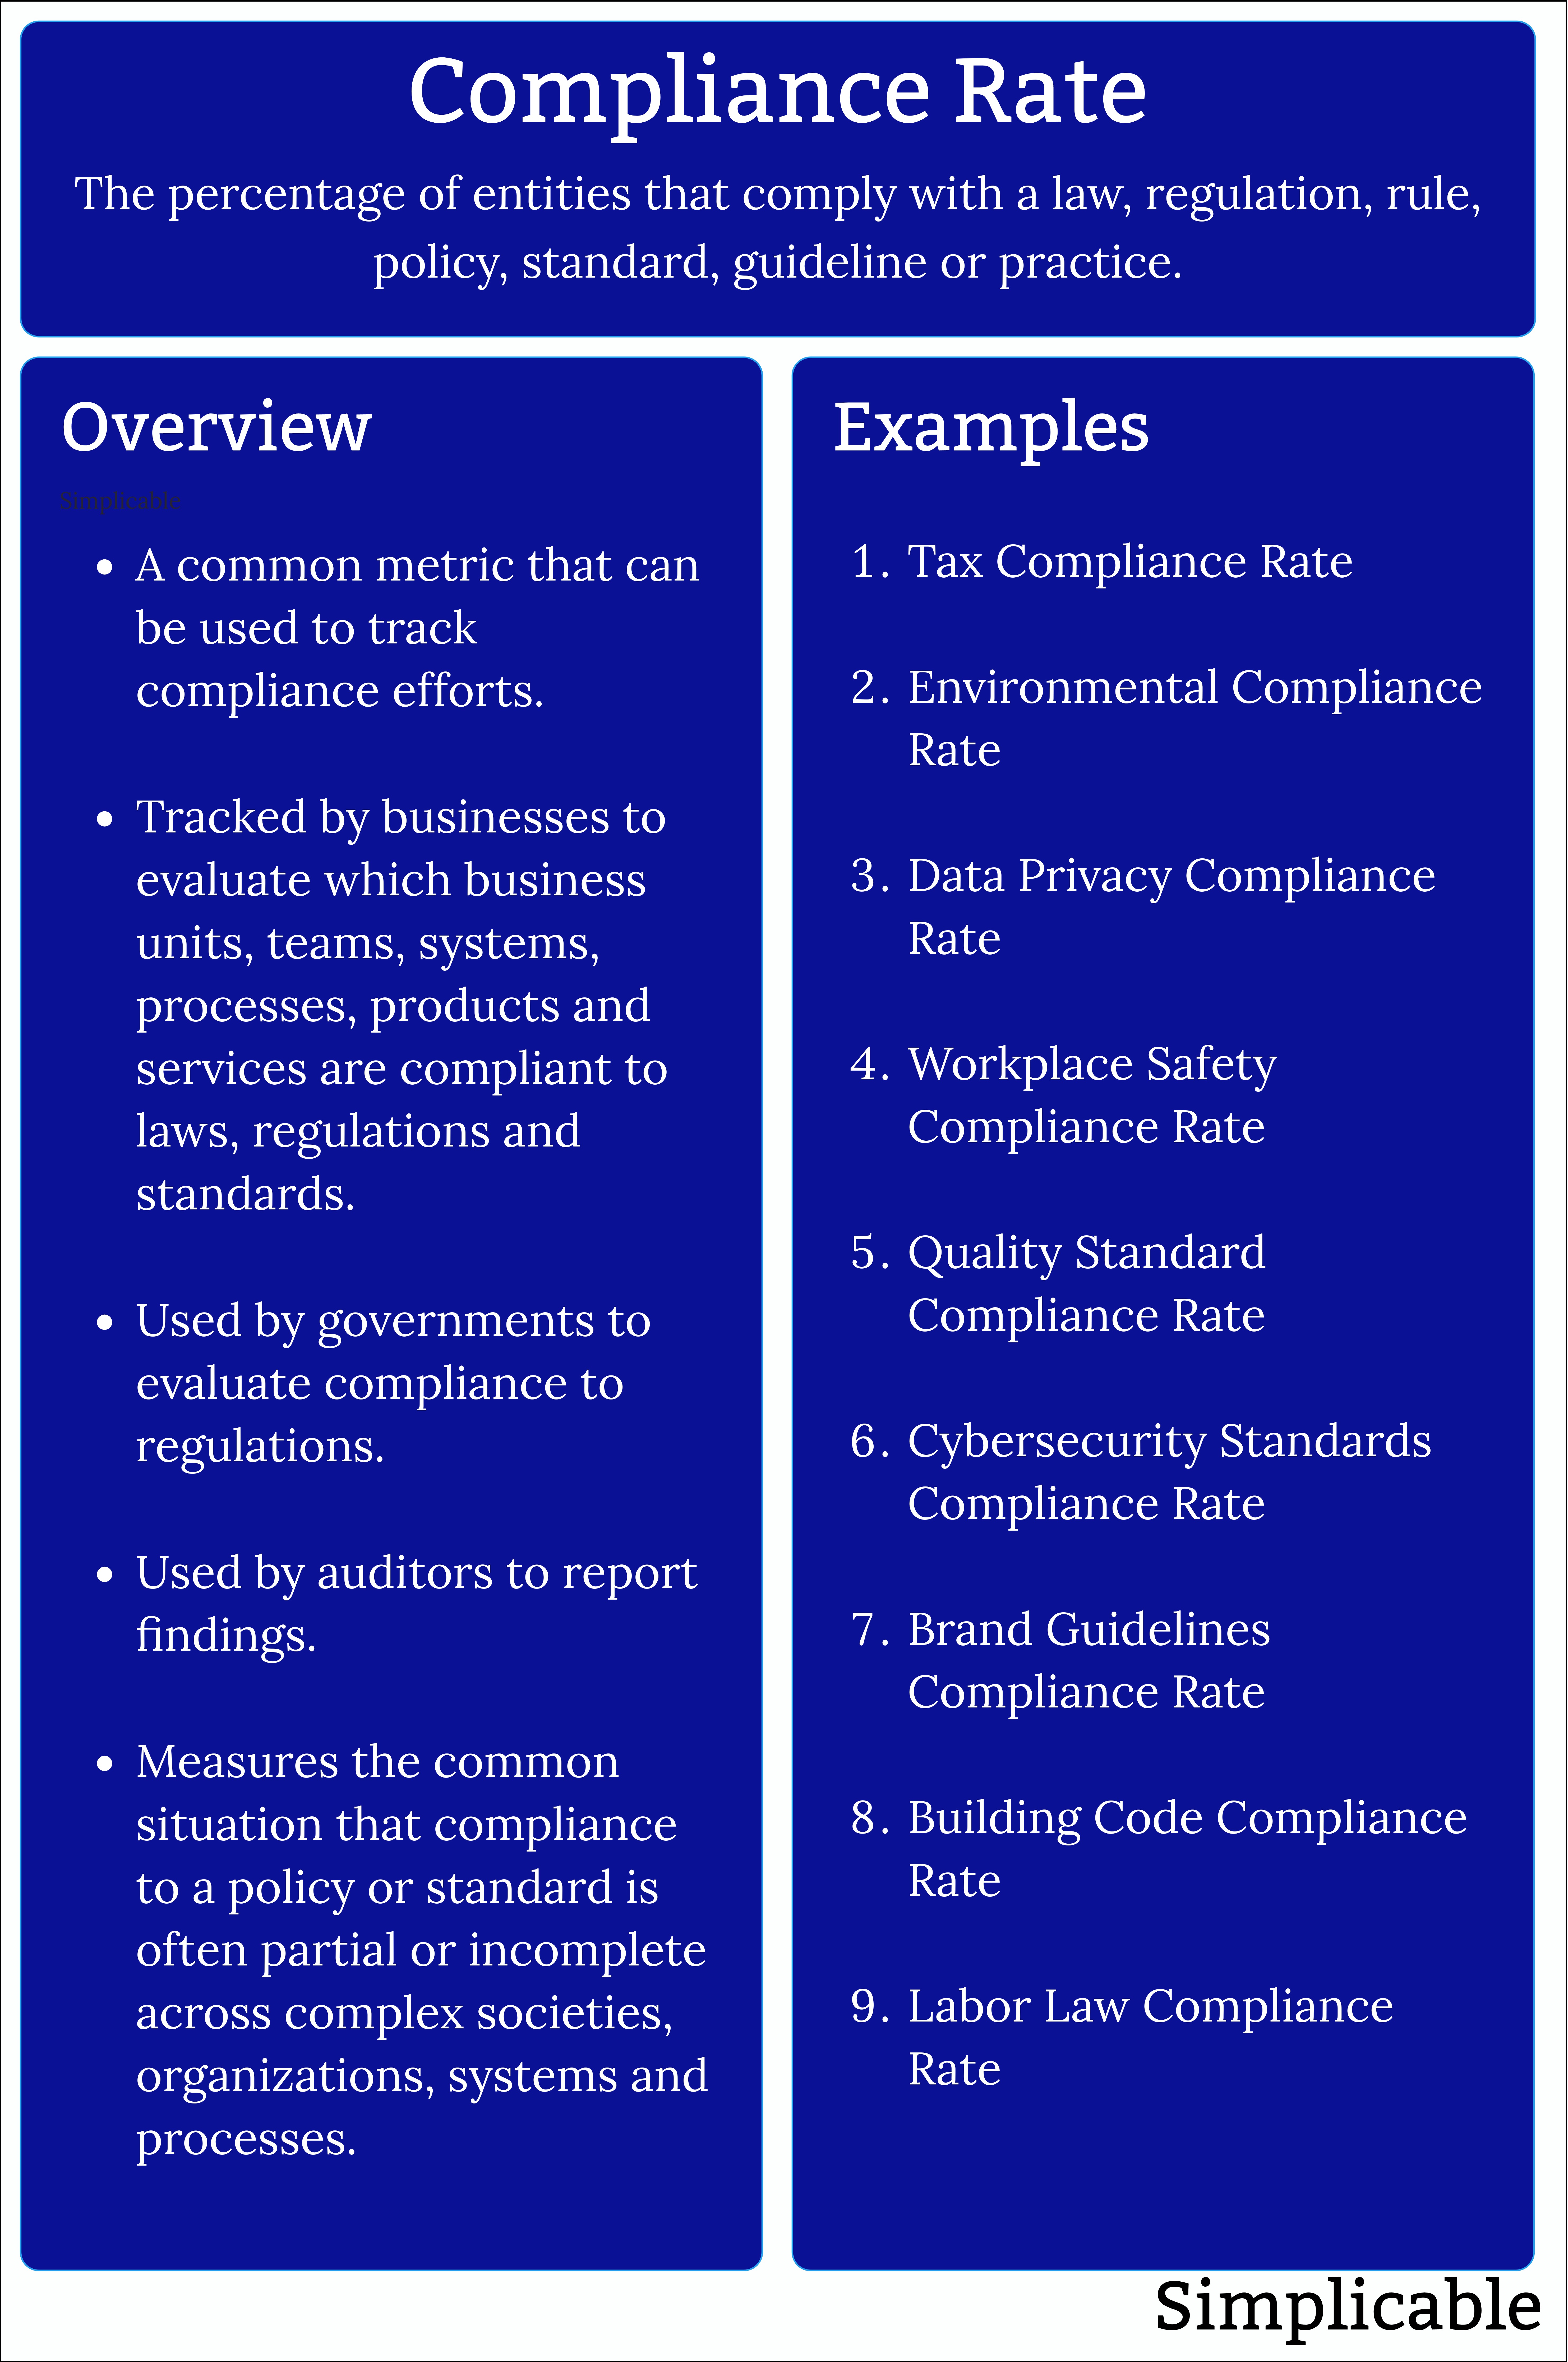 compliance rate overview and examples